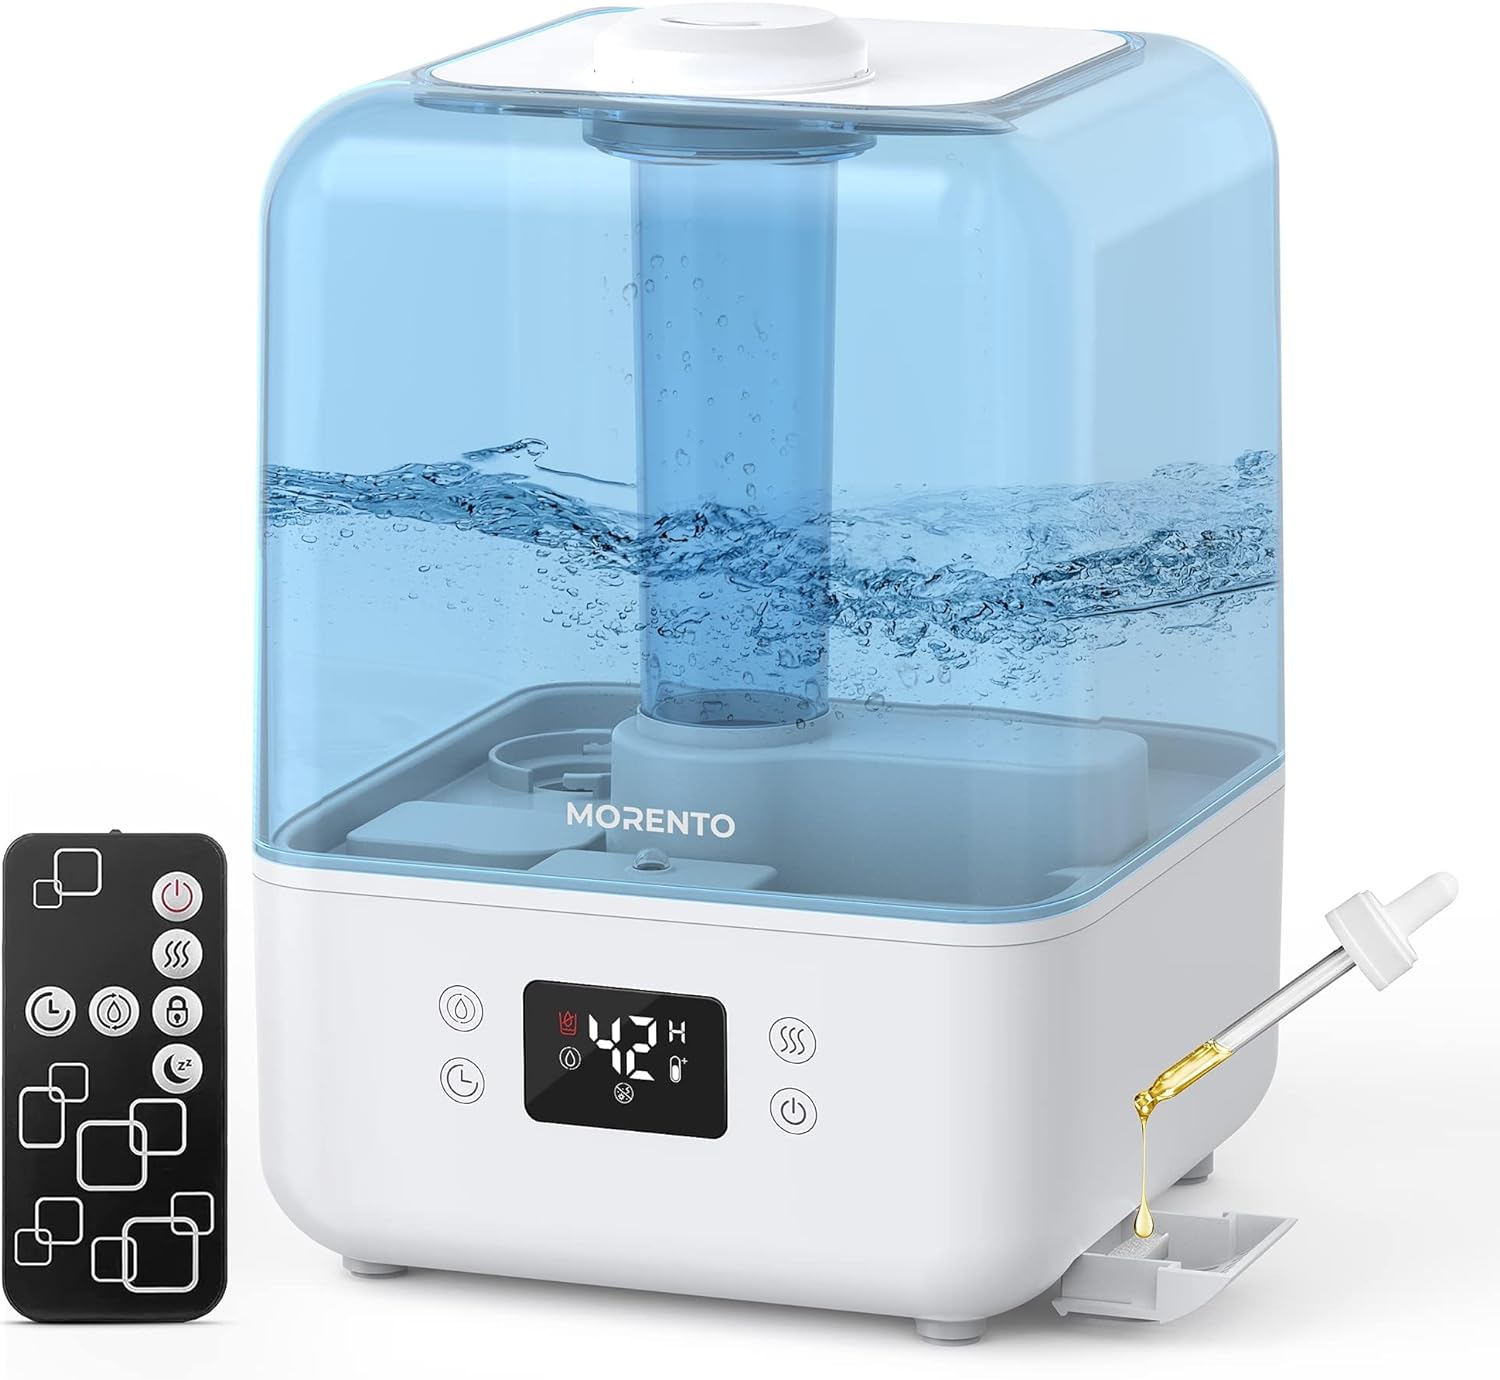 Limited-Time Discounts! Get MORENTO Humidifiers for Bedroom, 4.5L Top Fill Humidifiers for Large Room, Cool Mist Humidifiers for Home, Auto Shut-Off, Humidity Setting, Last up to 50Hrs with Night Light, White, 1 Pack at an Exclusive Price!